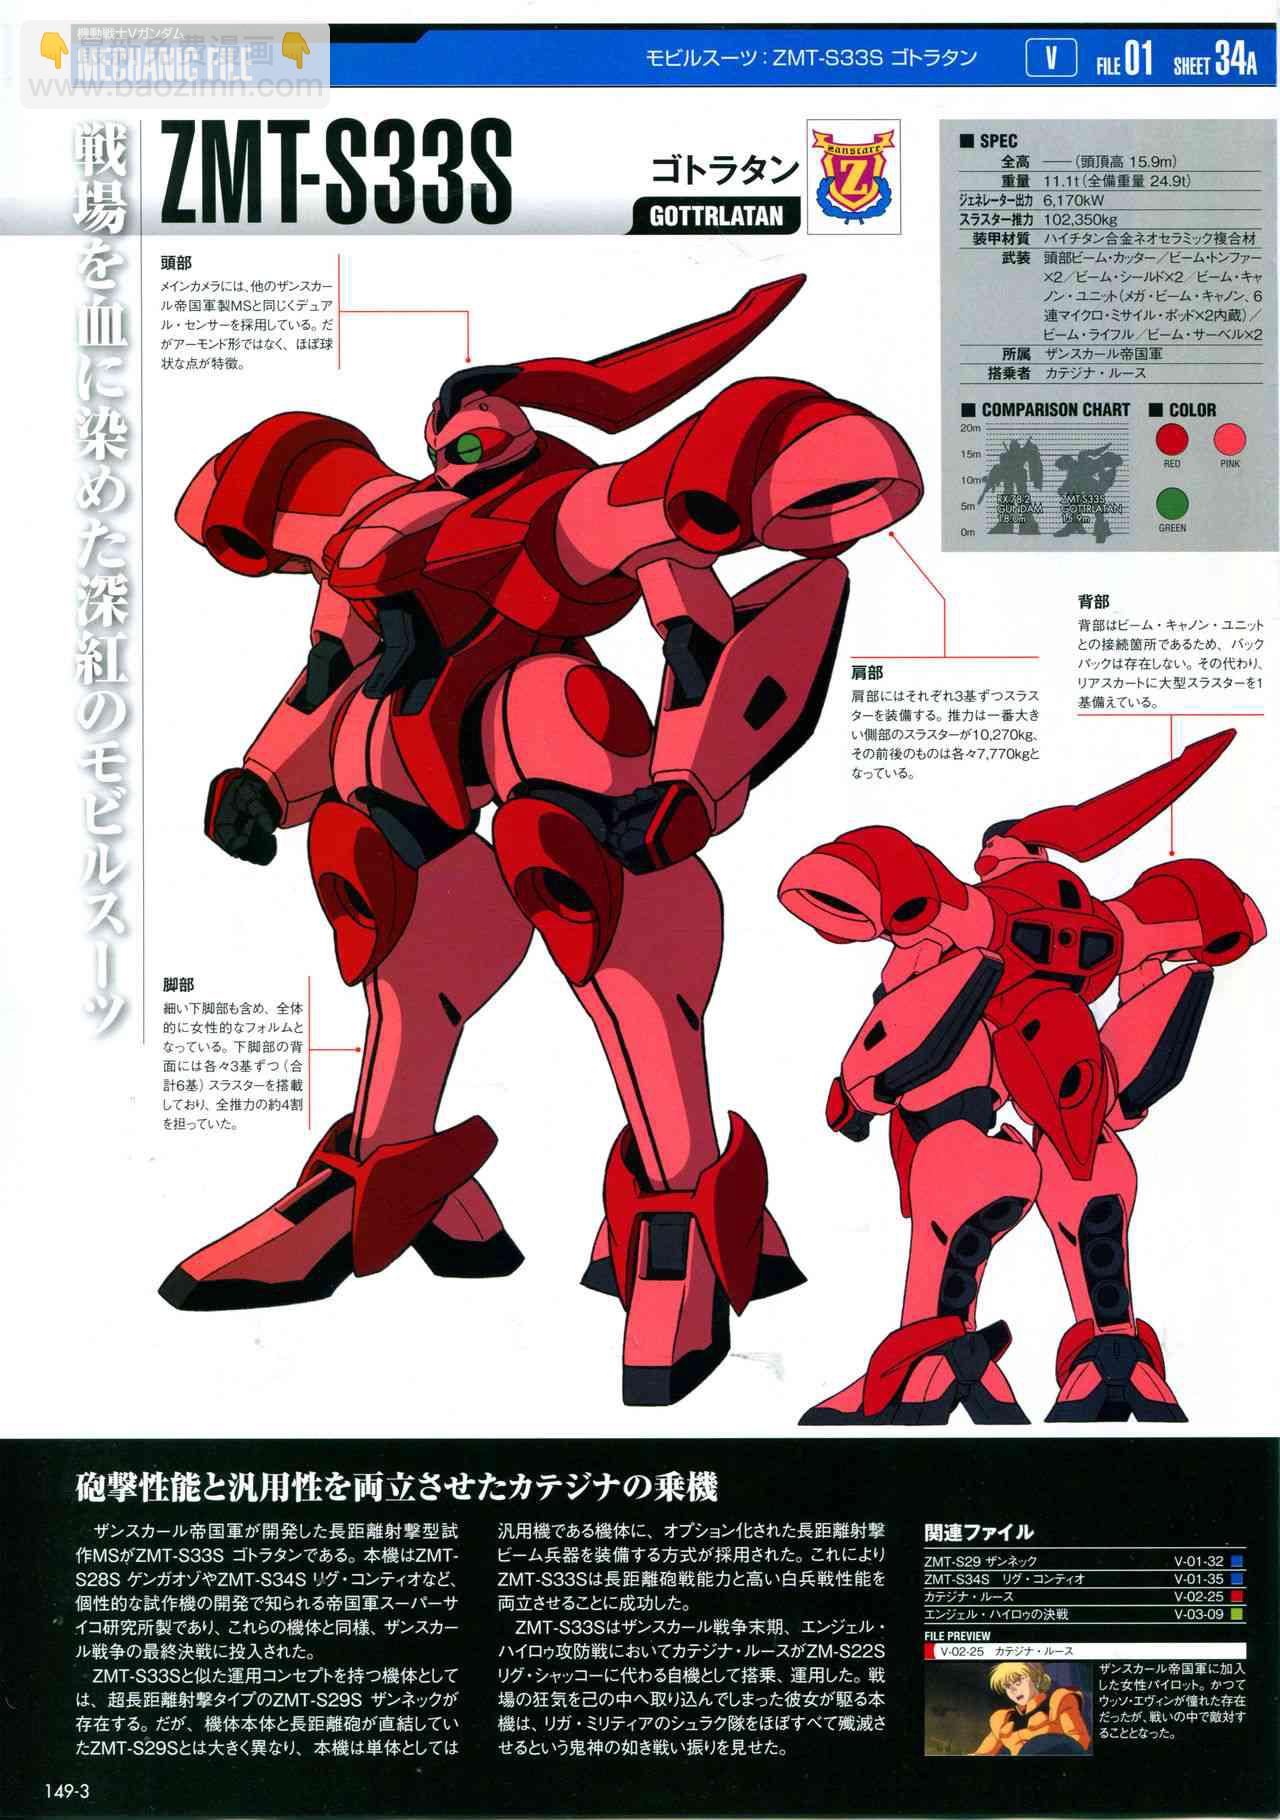 The Official Gundam Perfect File  - 149話 - 1